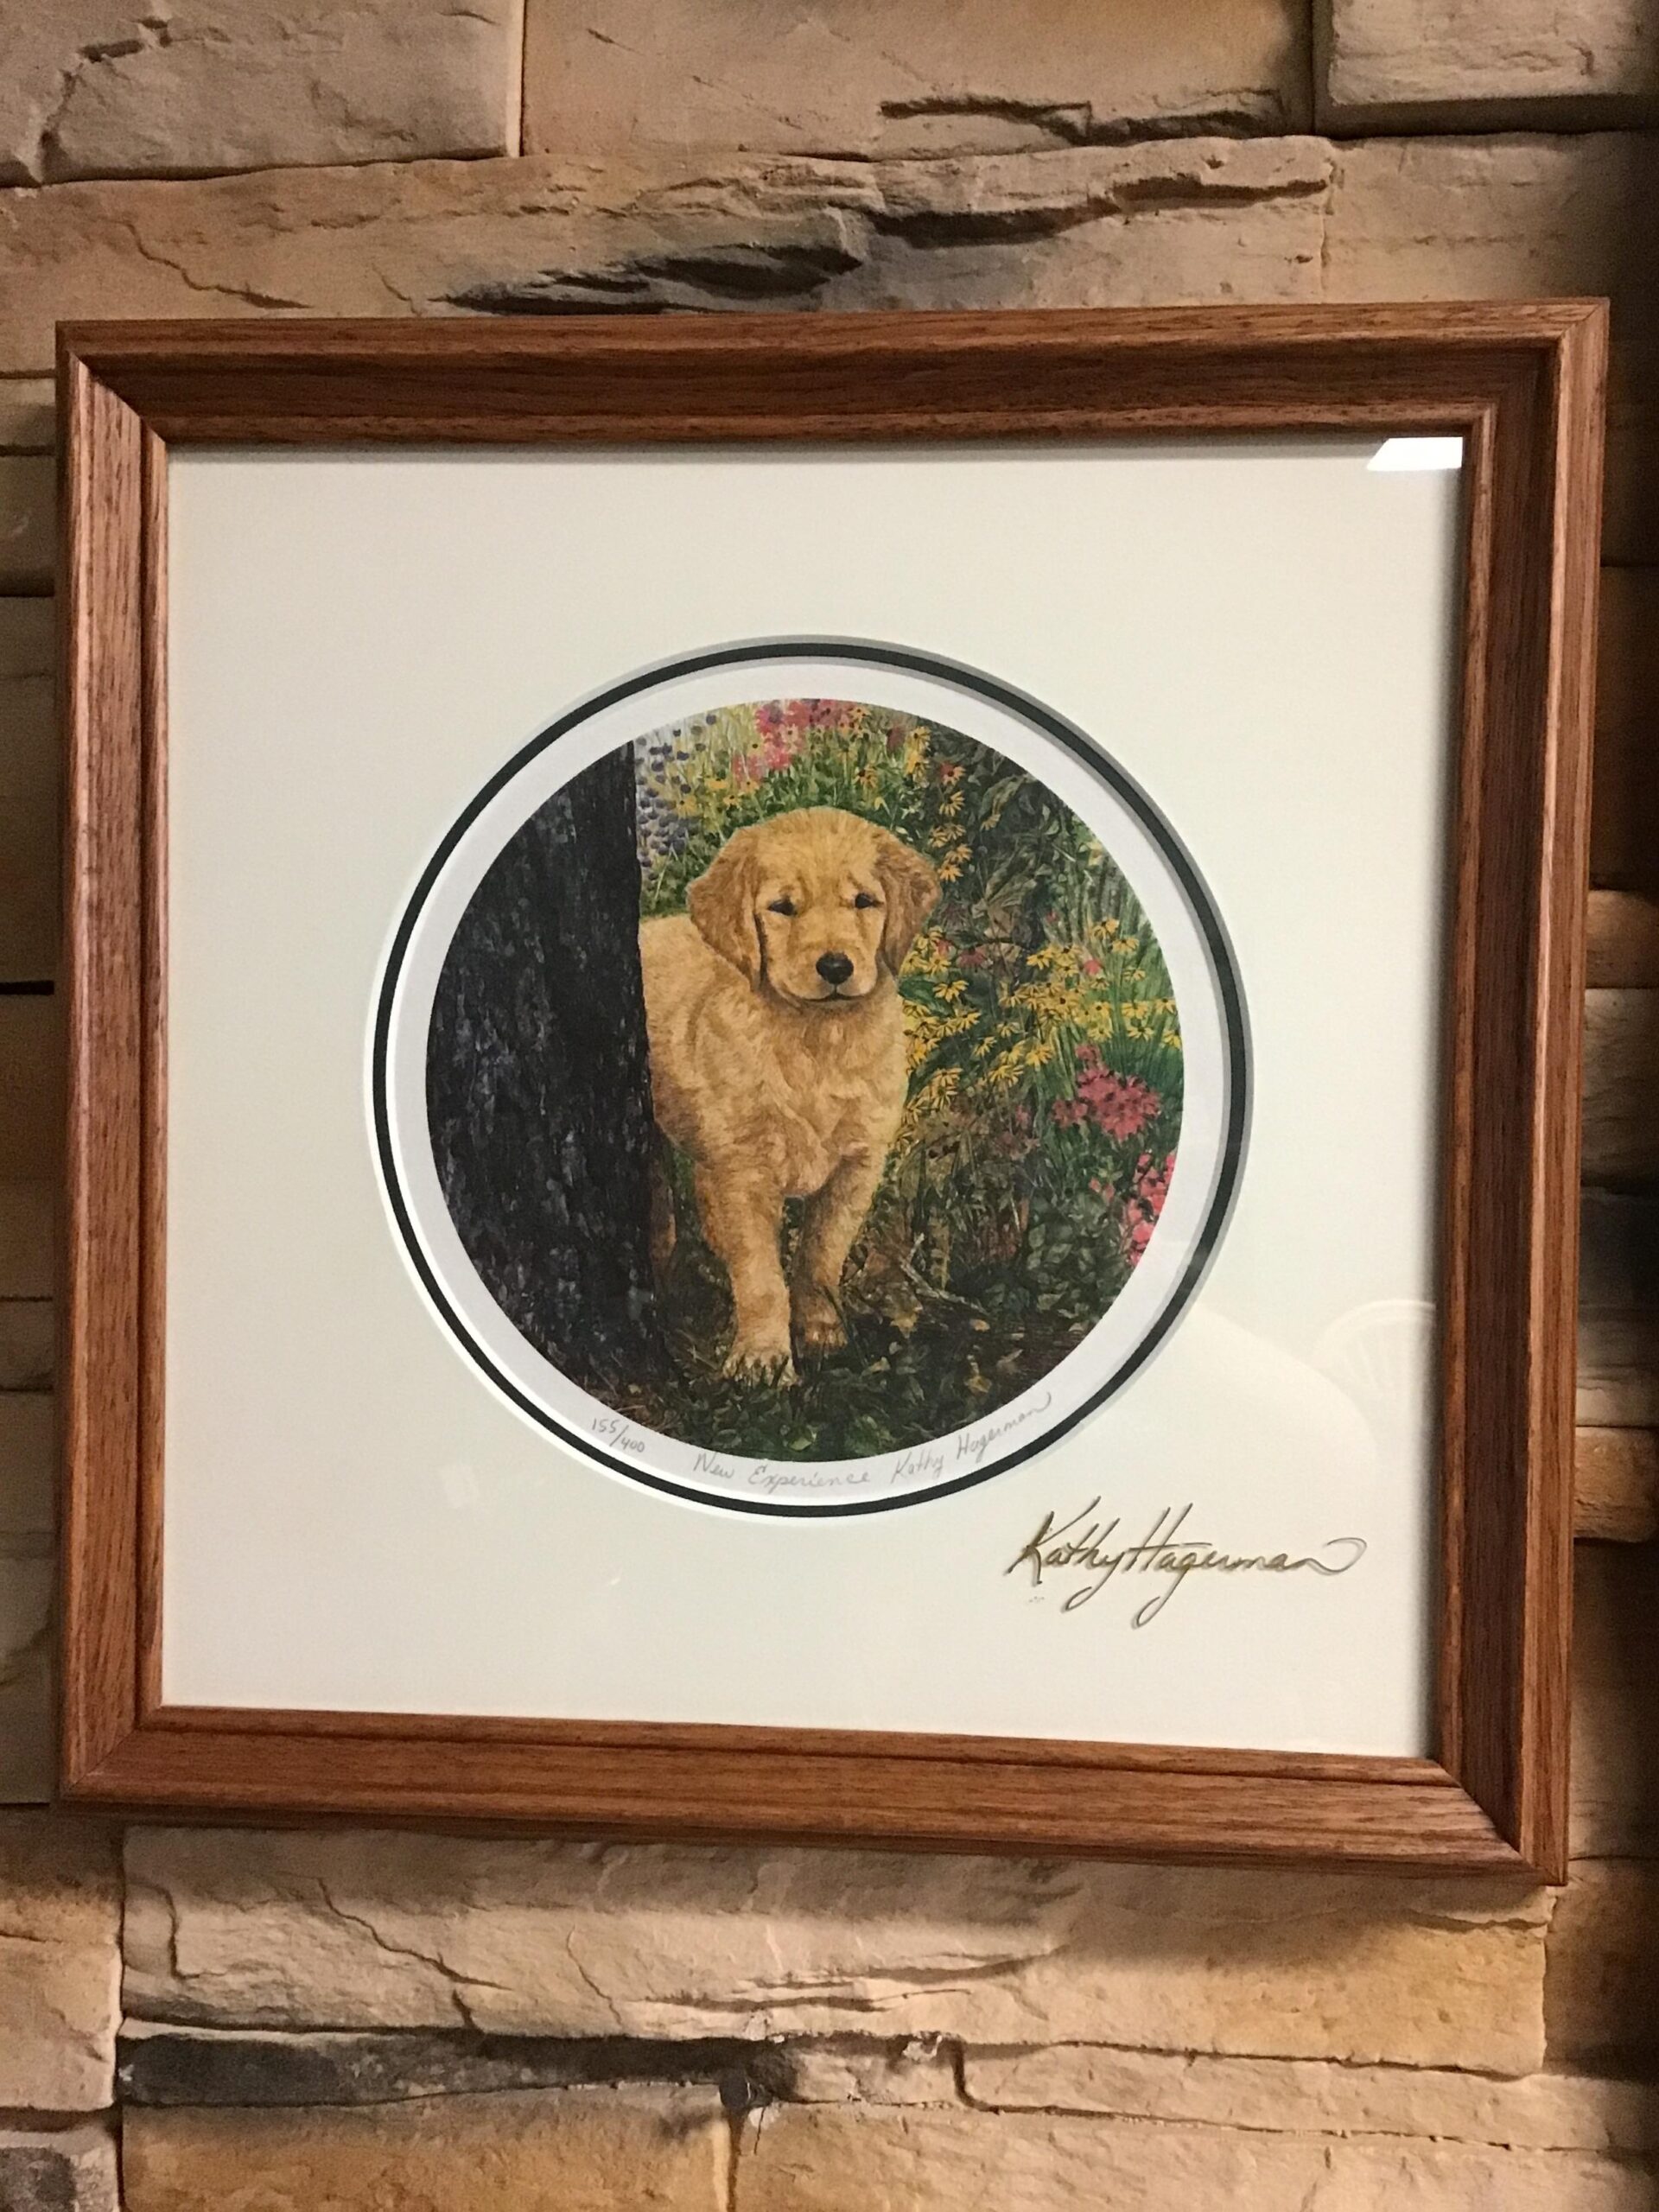 Kathy Hagerman Framed Print ‘New Experience’